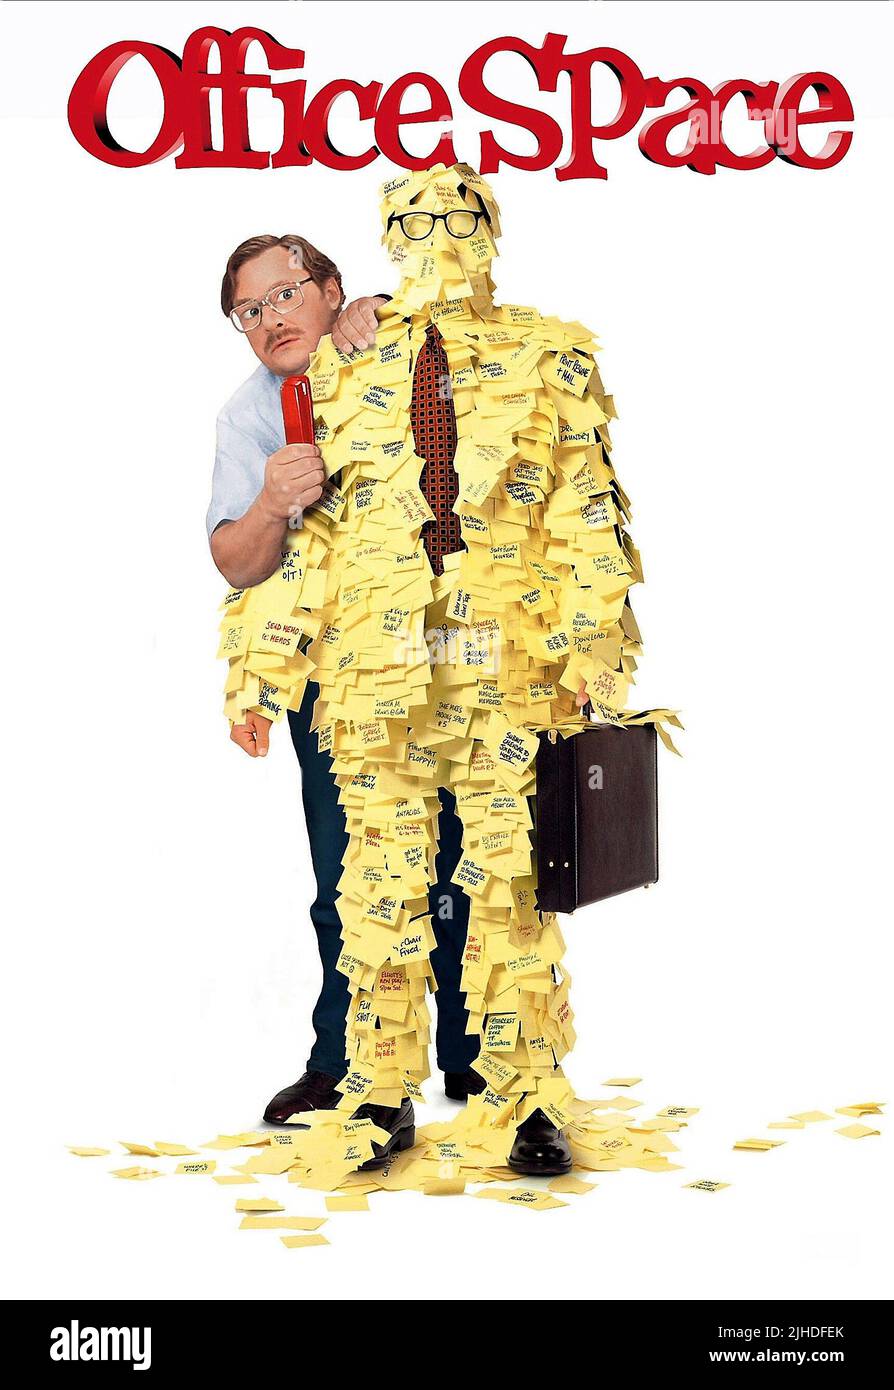 MOVIE POSTER, OFFICE SPACE, 1999 Stock Photo